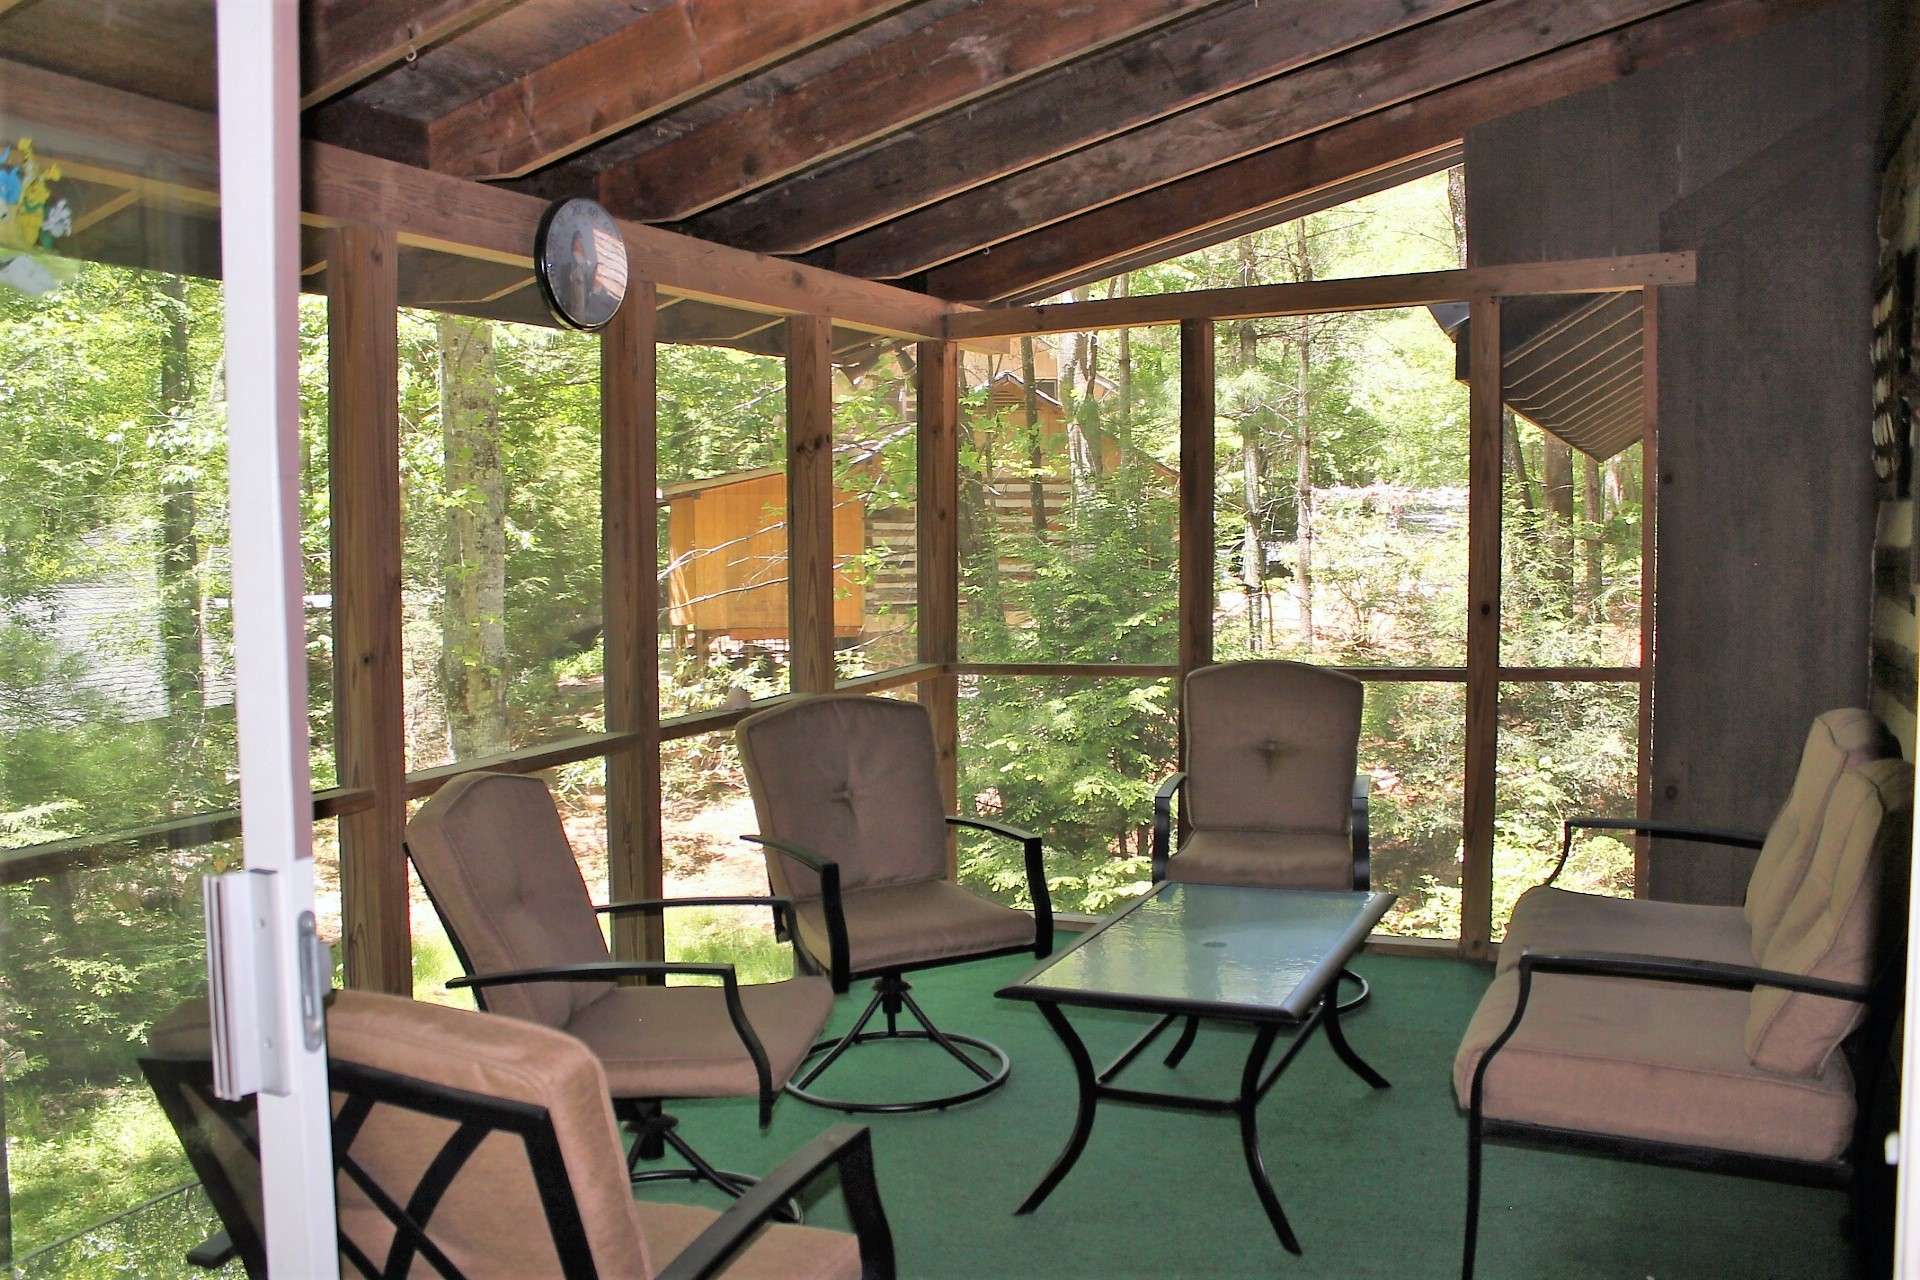 Enjoy the cool summer breezes while entertaining friends on the covered screened porch with easy access to the kitchen.